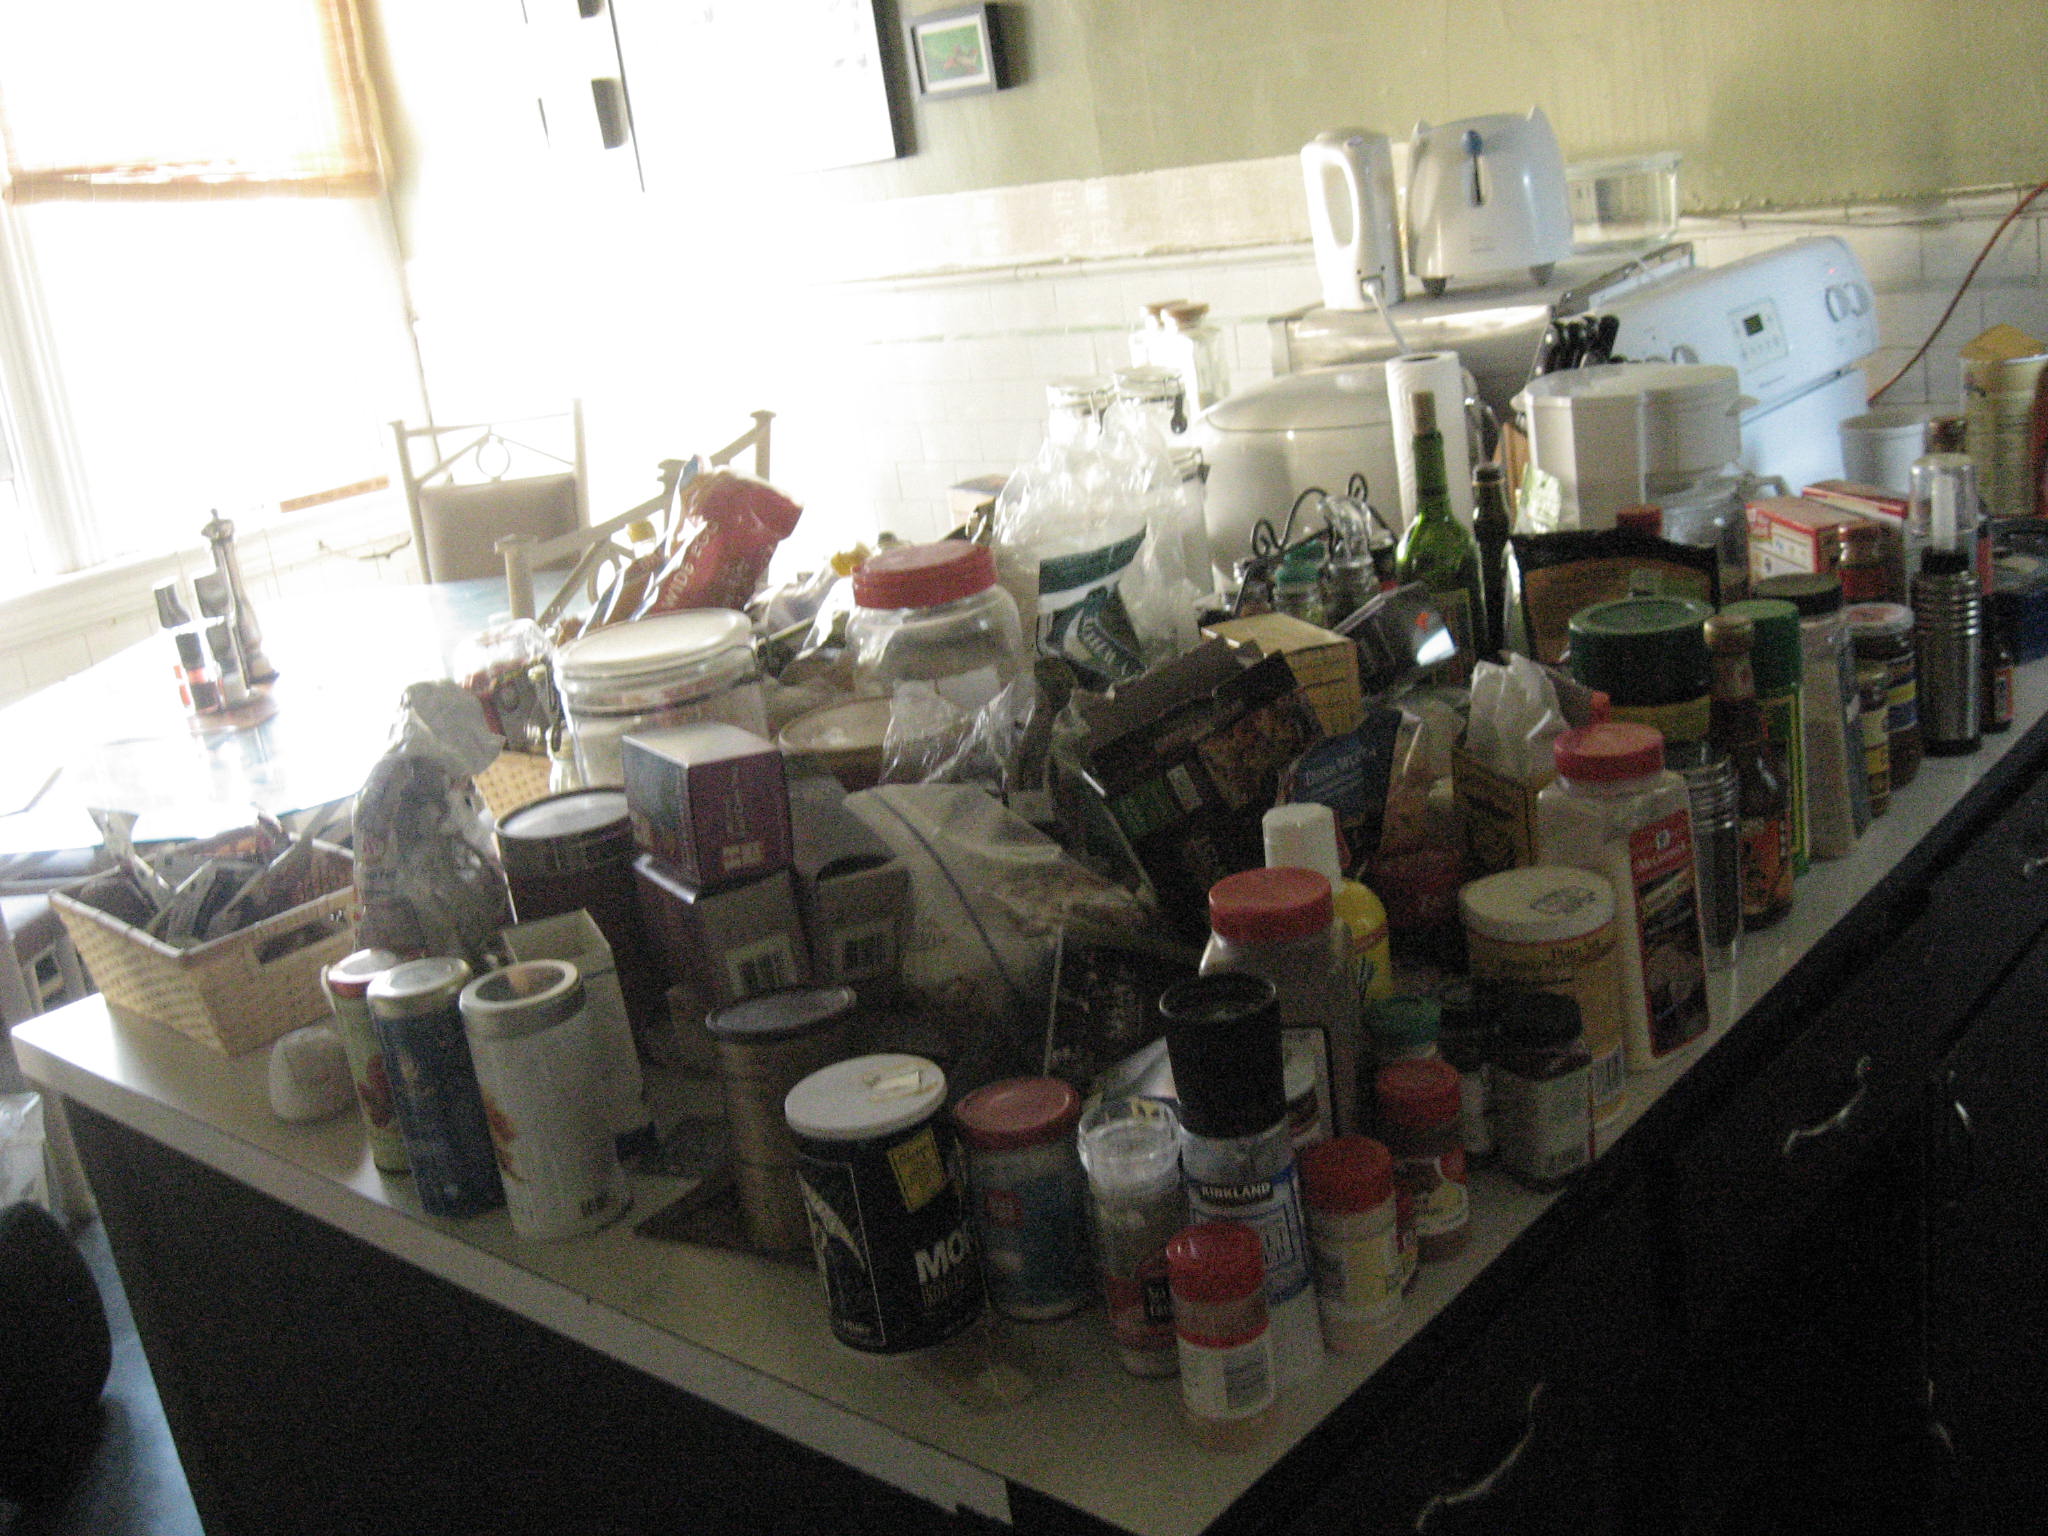 All the crap in our cabinets!